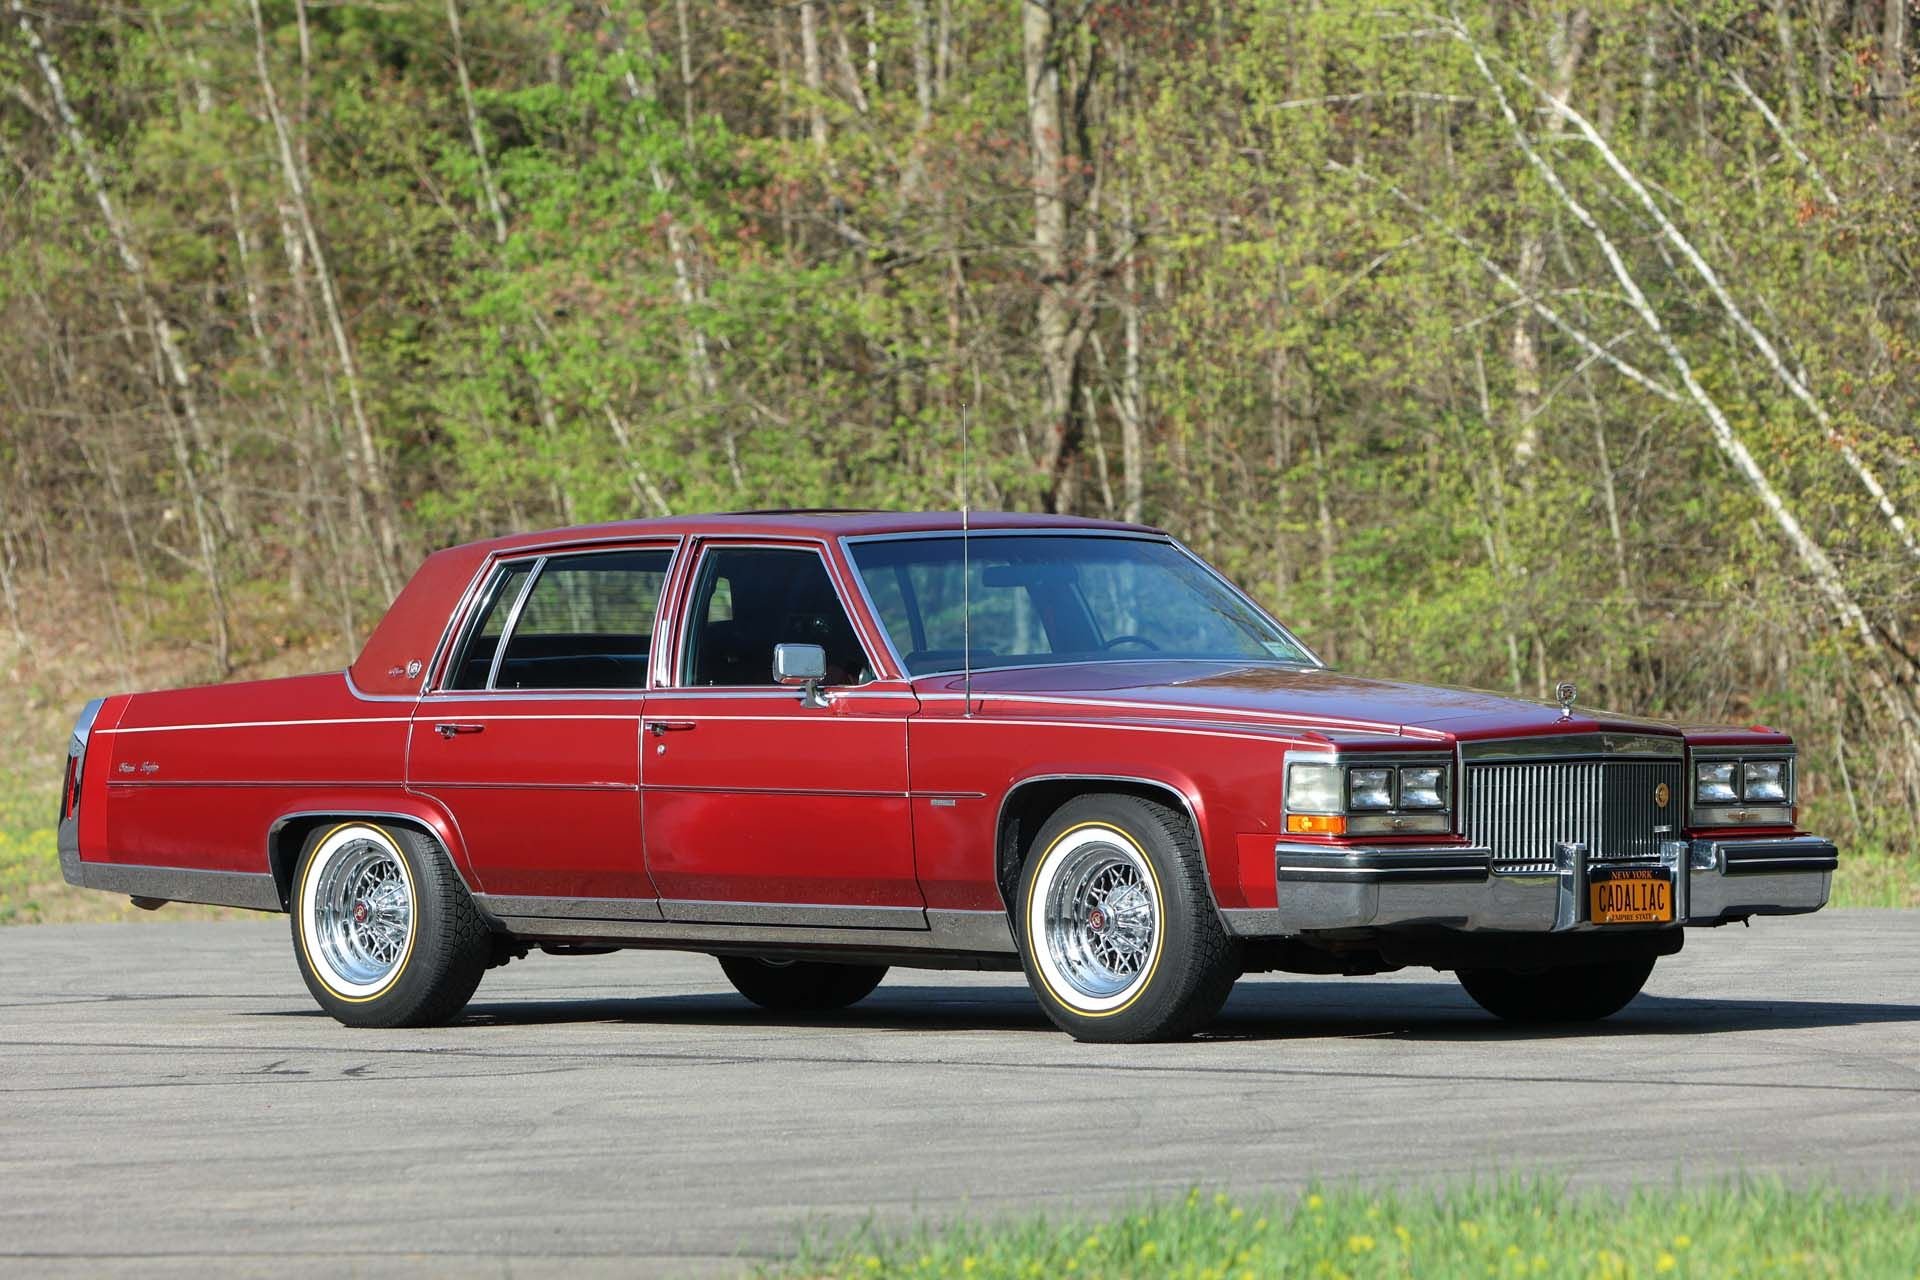 For Sale 1980 Cadillac Fleetwood Brougham d'Elegance '500 Cubic Inch'